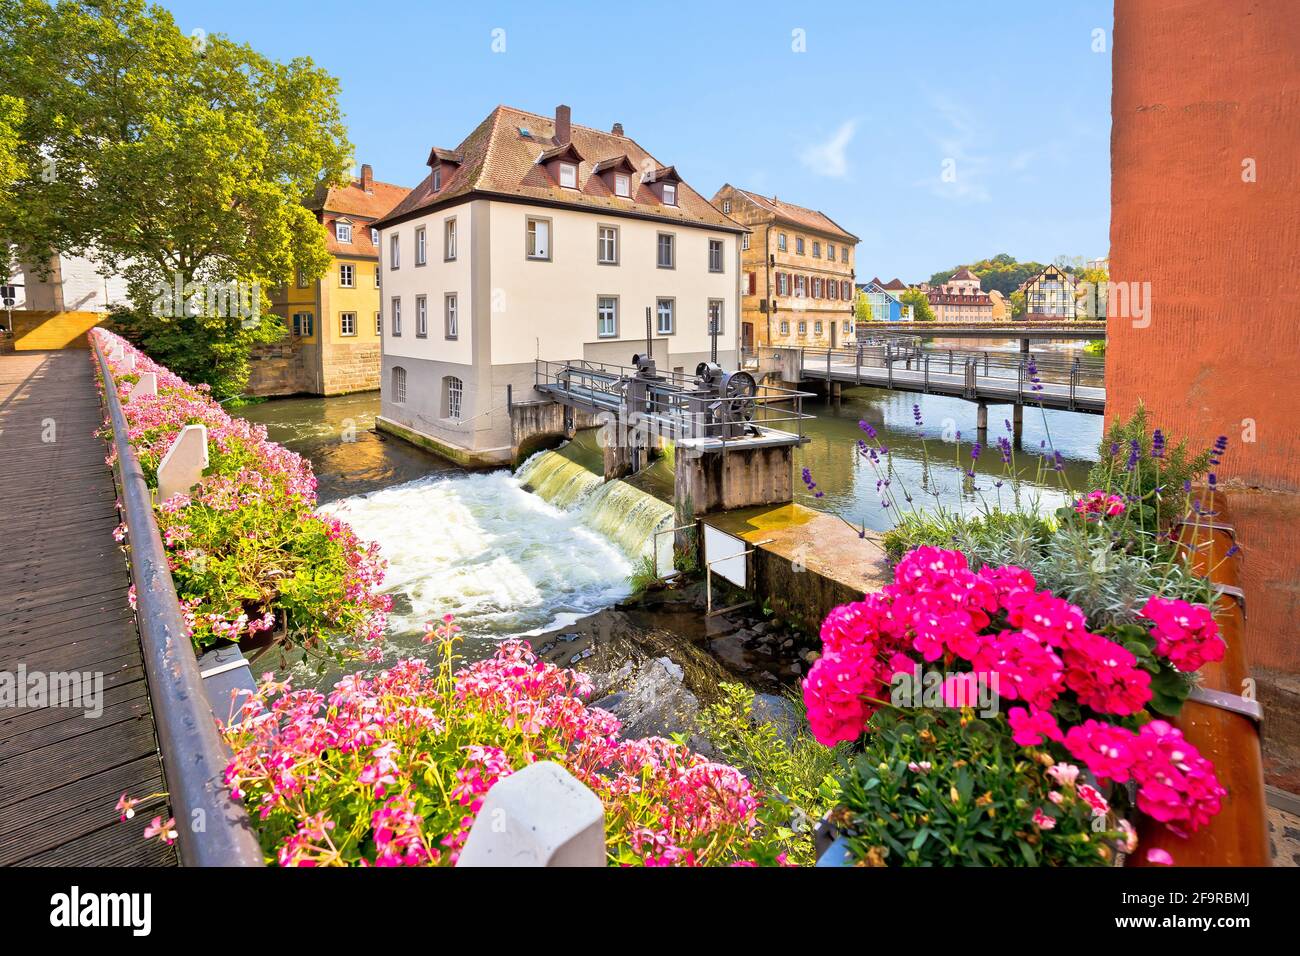 Bamberg. Scenic view of Old Town of Bamberg with bridges over the Regnitz river, Upper Franconia, Bavaria region of Germany Stock Photo